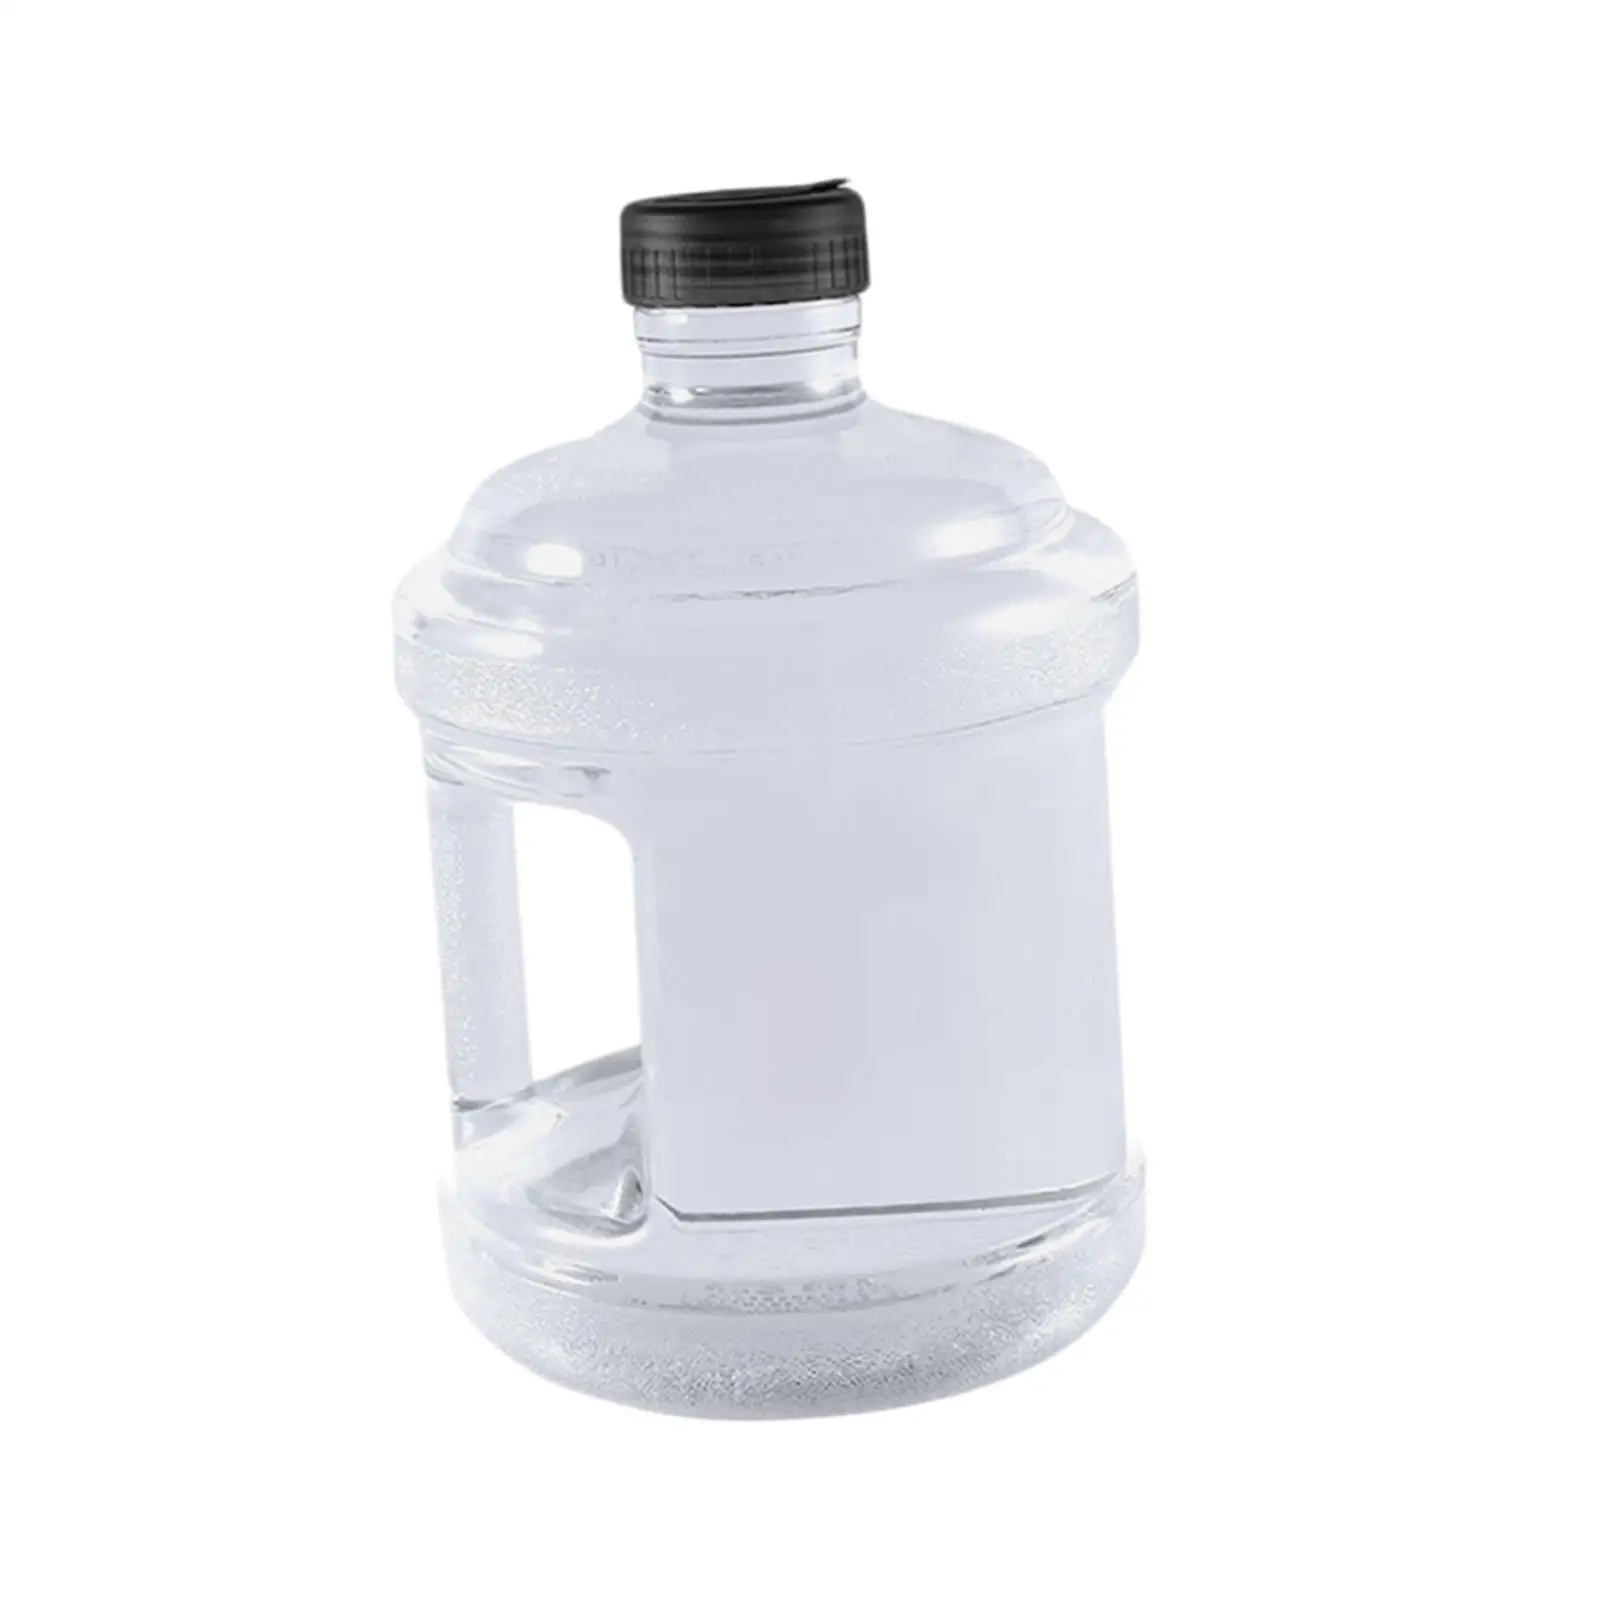 Bucket 3L Pure Water Barrel Food Grade Water Bottle Carrier Water Storage Jugs for Drinking Kitchen Camping Hiking Fittings